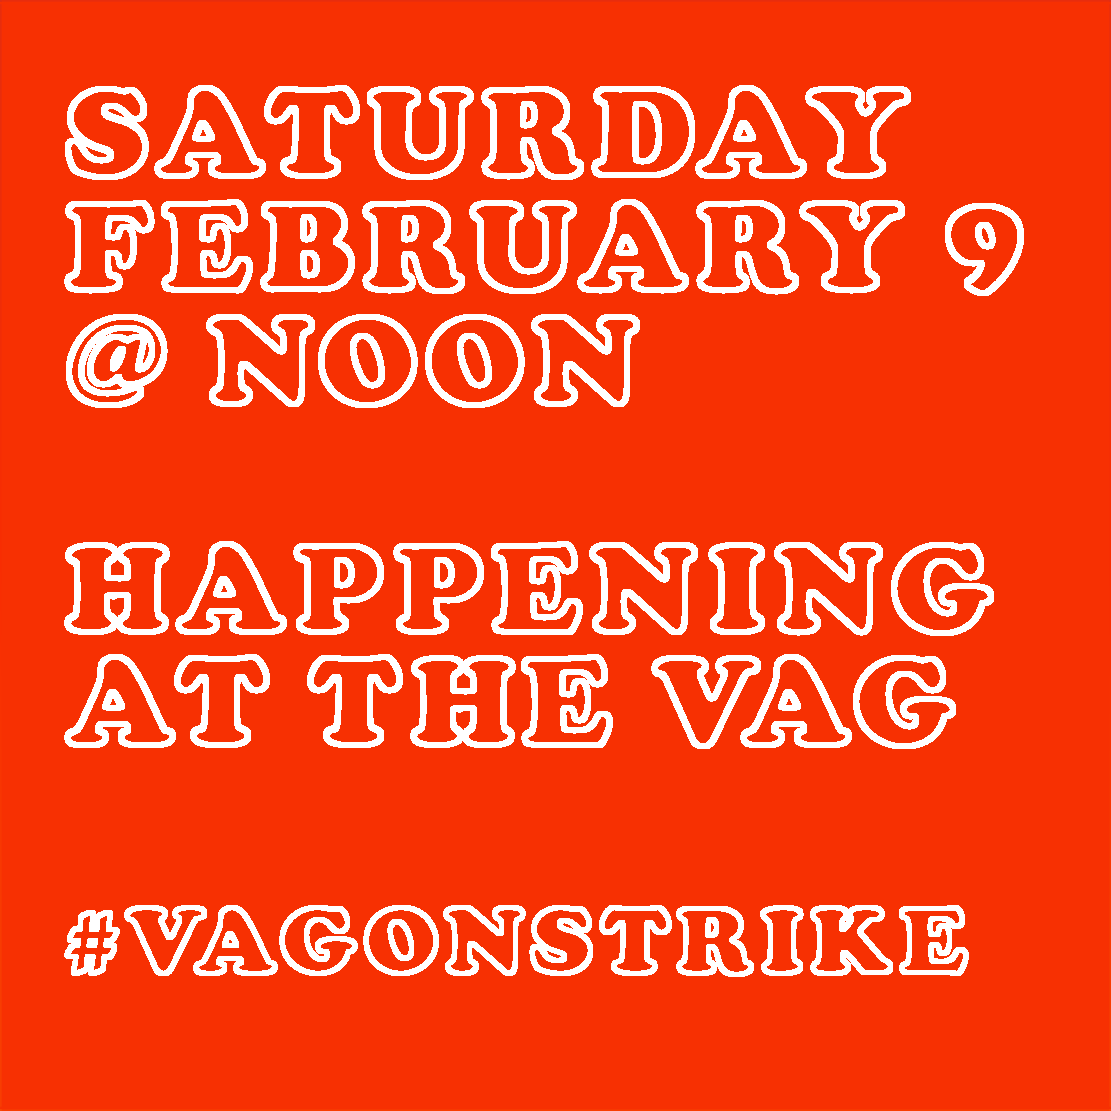 Library closed in solidarity with #VAGONSTRIKE